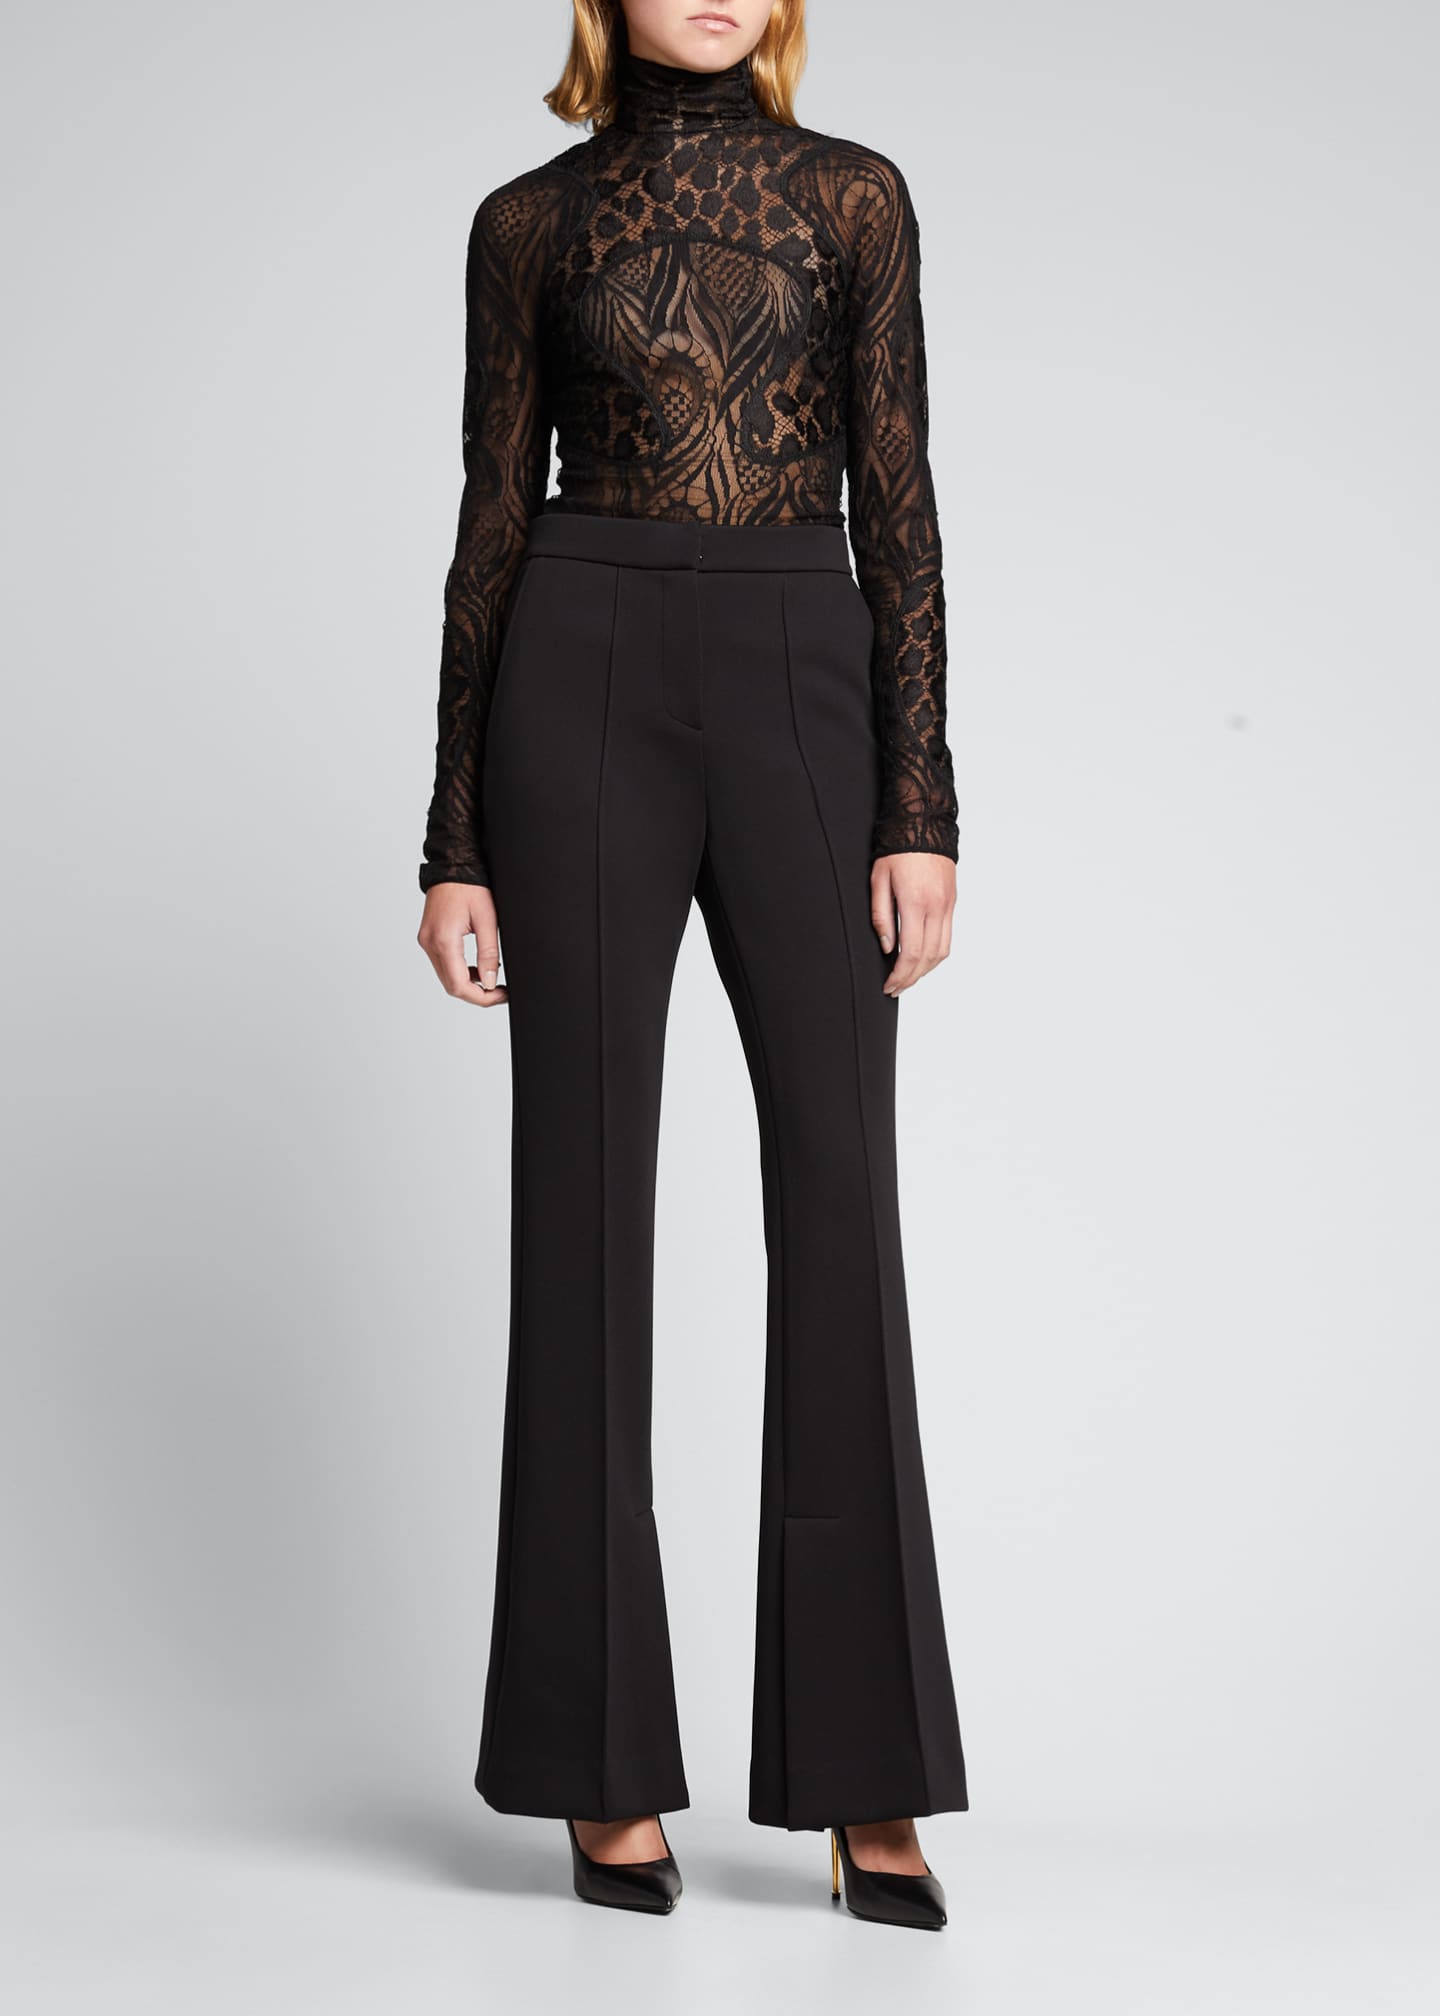 TOM FORD Mixed-Lace Turtleneck Top - Bergdorf Goodman